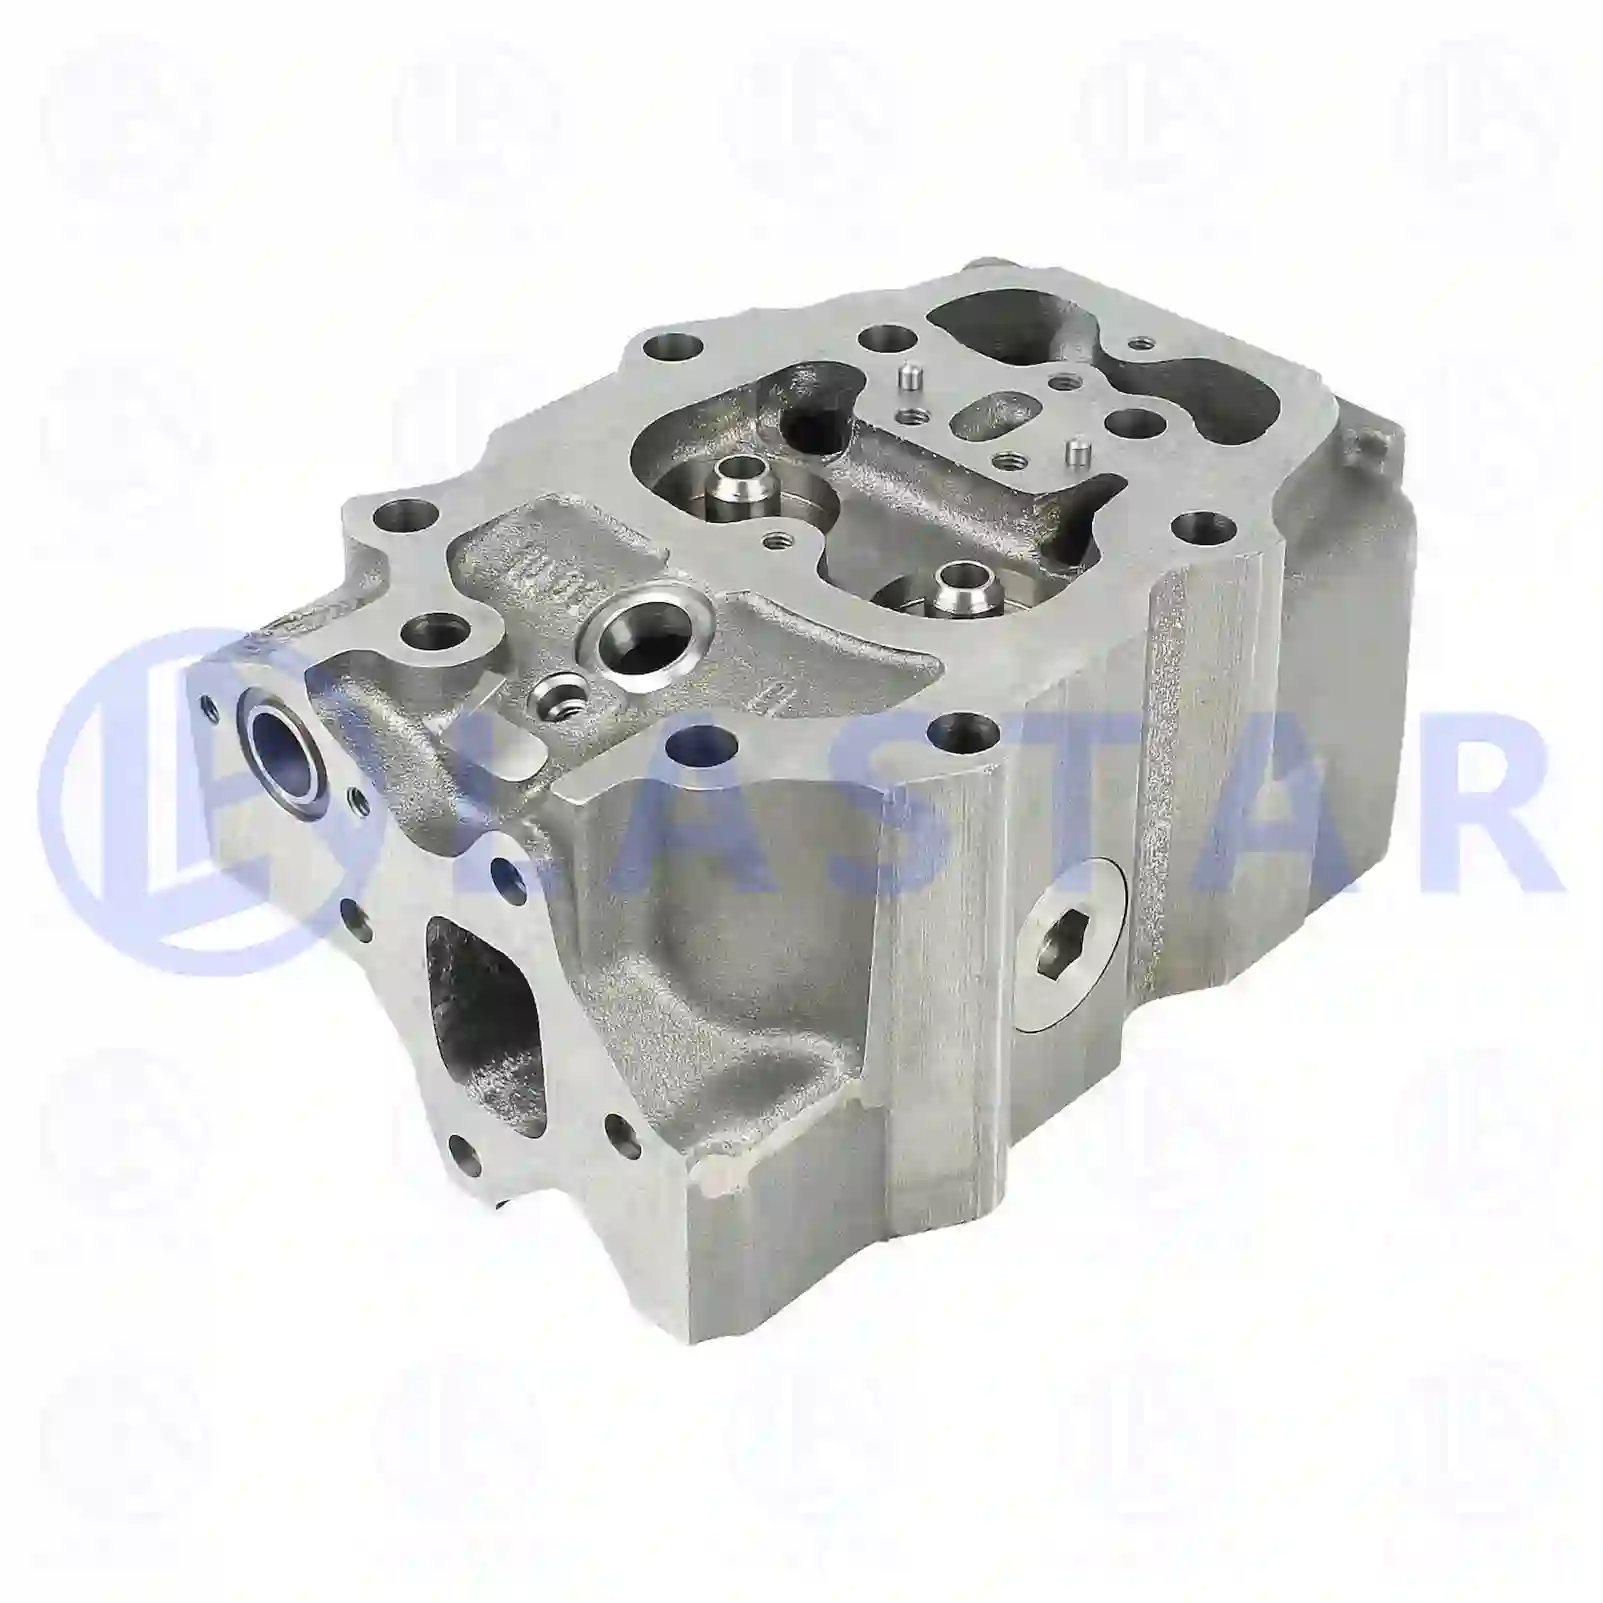 Cylinder head, without valves, 77700027, 468869, 470332, 5002717 ||  77700027 Lastar Spare Part | Truck Spare Parts, Auotomotive Spare Parts Cylinder head, without valves, 77700027, 468869, 470332, 5002717 ||  77700027 Lastar Spare Part | Truck Spare Parts, Auotomotive Spare Parts